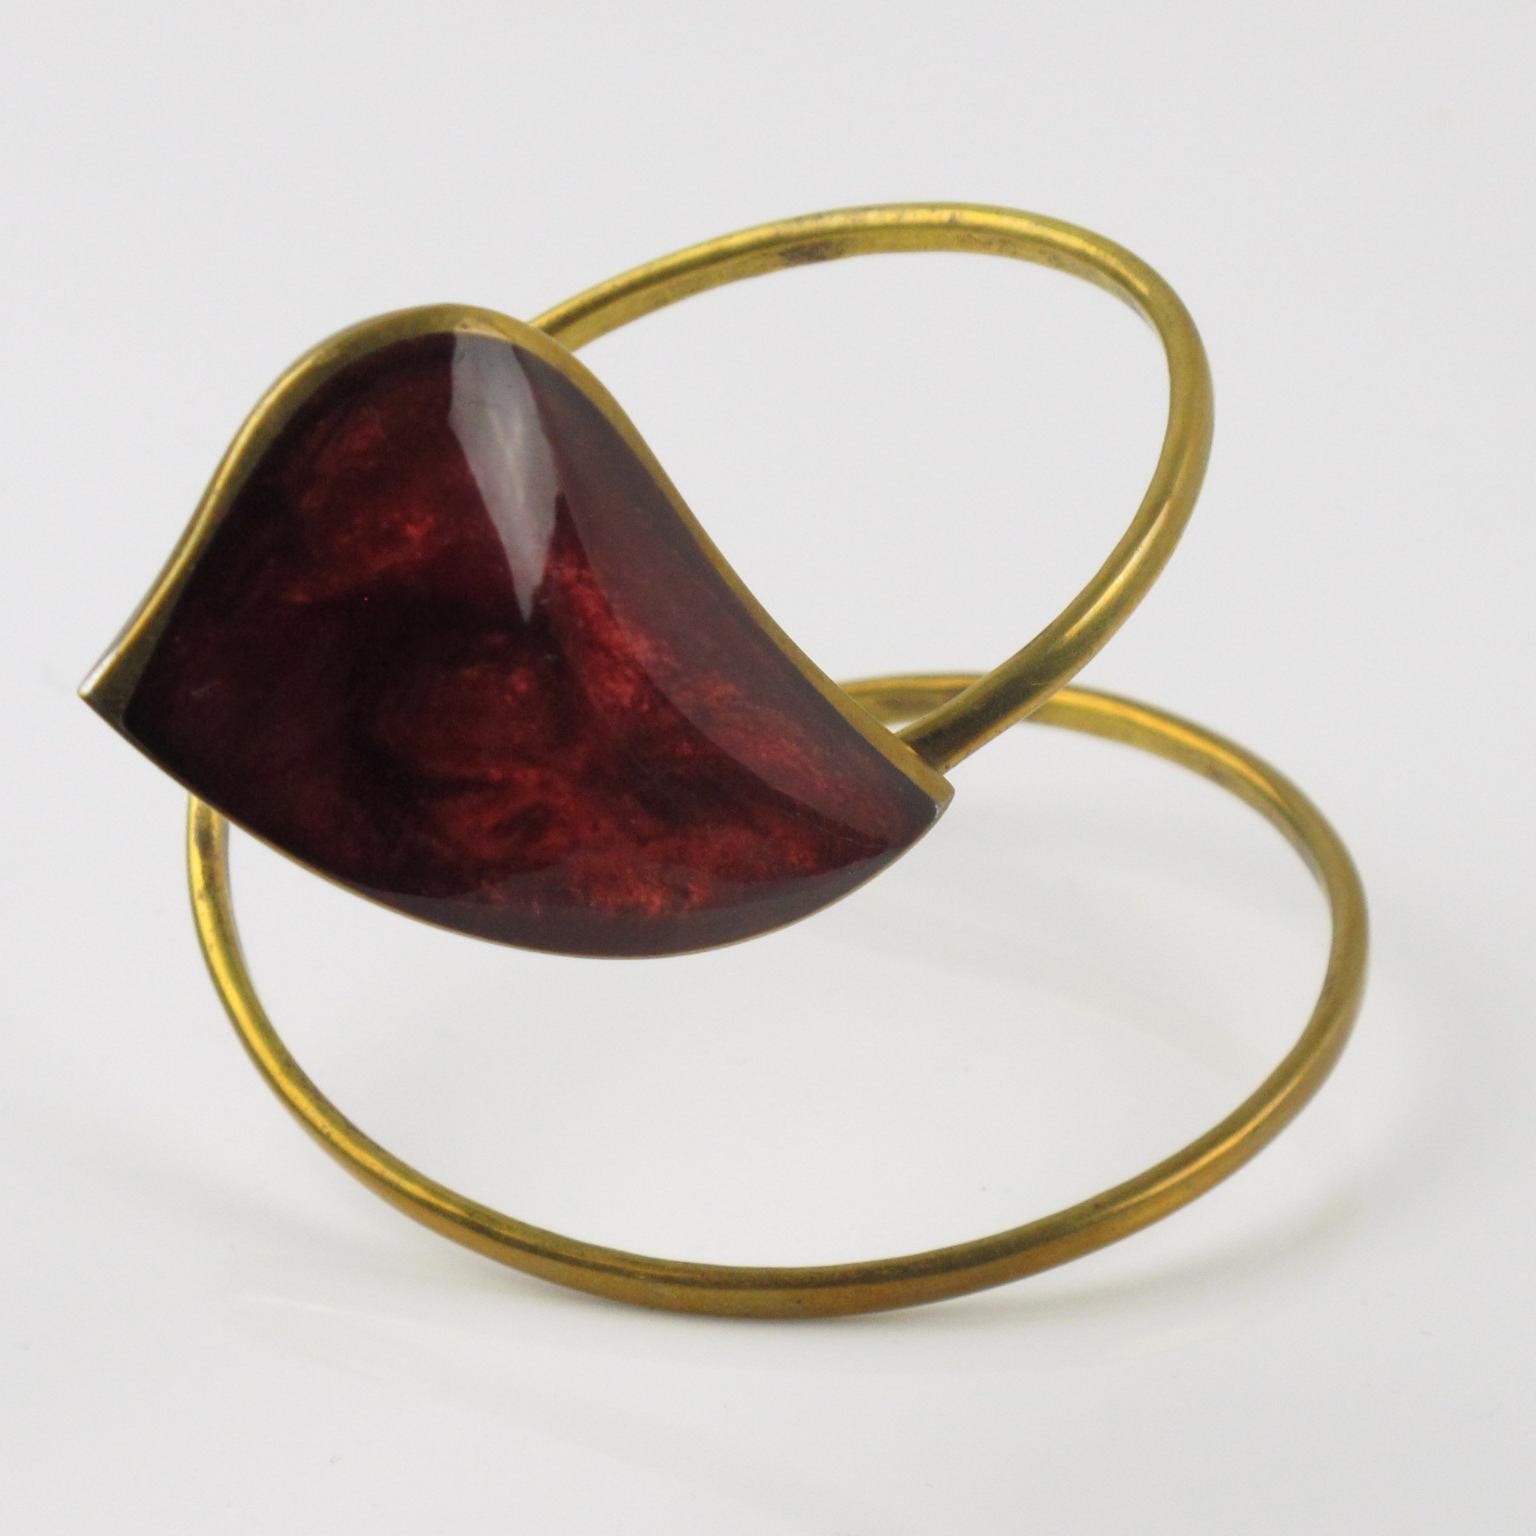 Stunning Space Age brass coiled bracelet bangle. Gilded brass open bangle finished with carved drop design topped with red resin cabochon. No visible maker's mark.
Measurements: The bracelet fits a Small to Medium size wrist - 2.44 in diameter (6.2